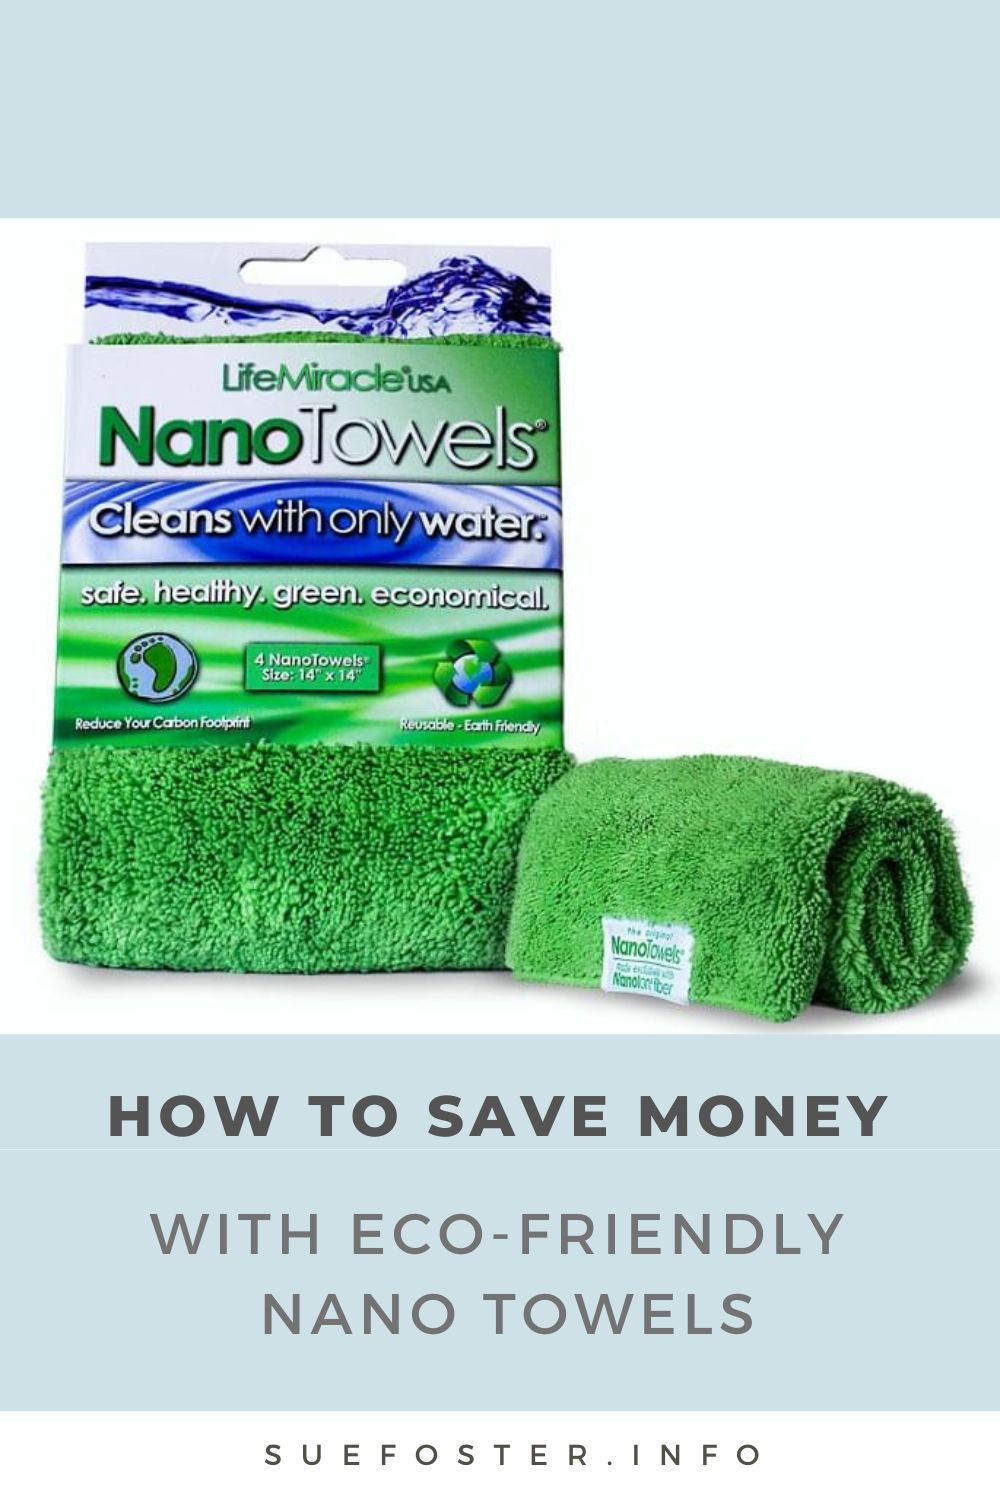 Discover the benefits of using Nano towels for eco-friendly and cost-effective cleaning.